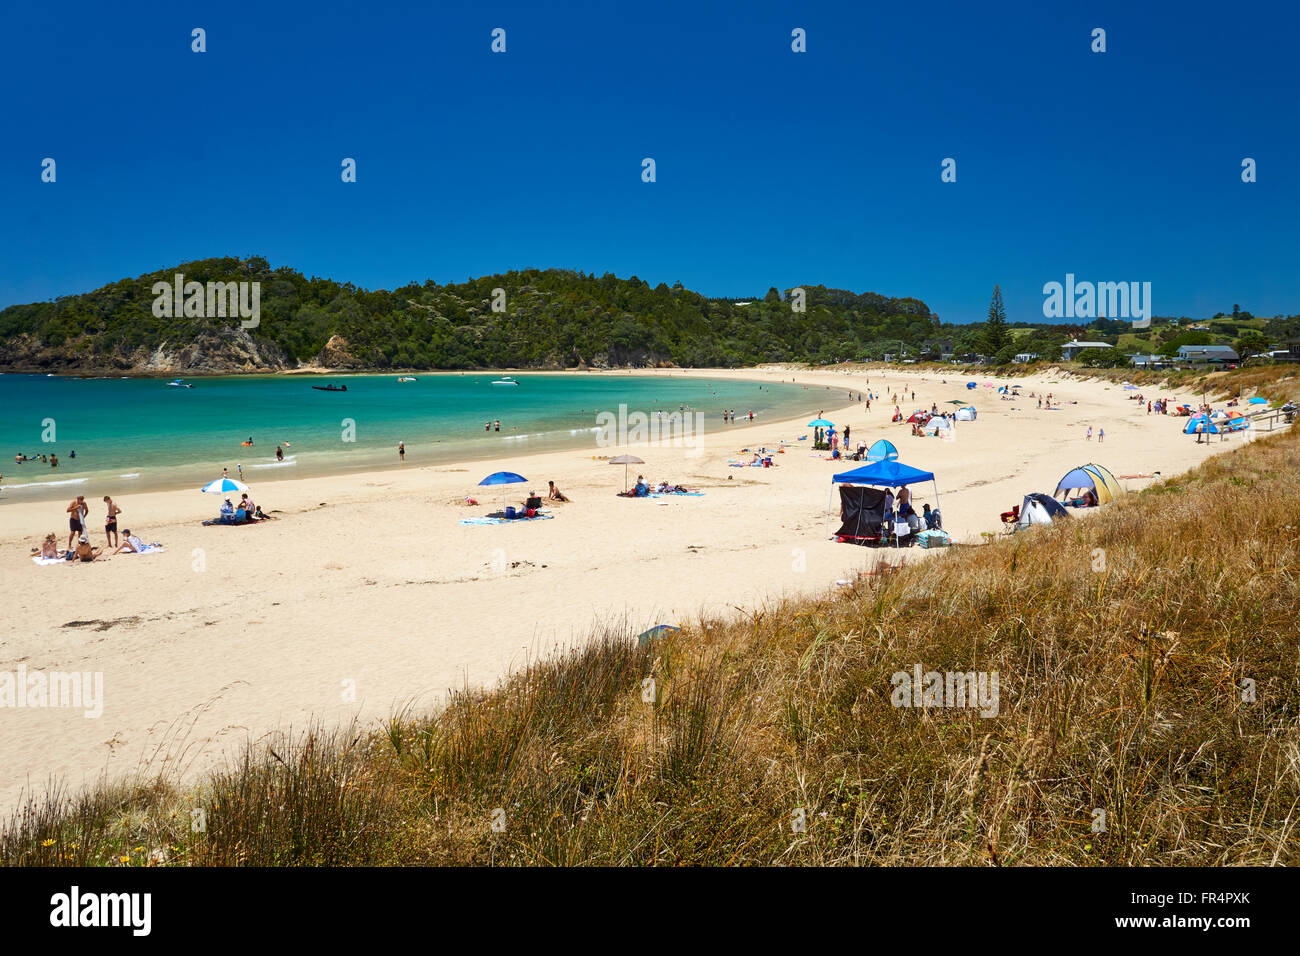 People sunbathing on a typical New Zealand beach Stock Photo